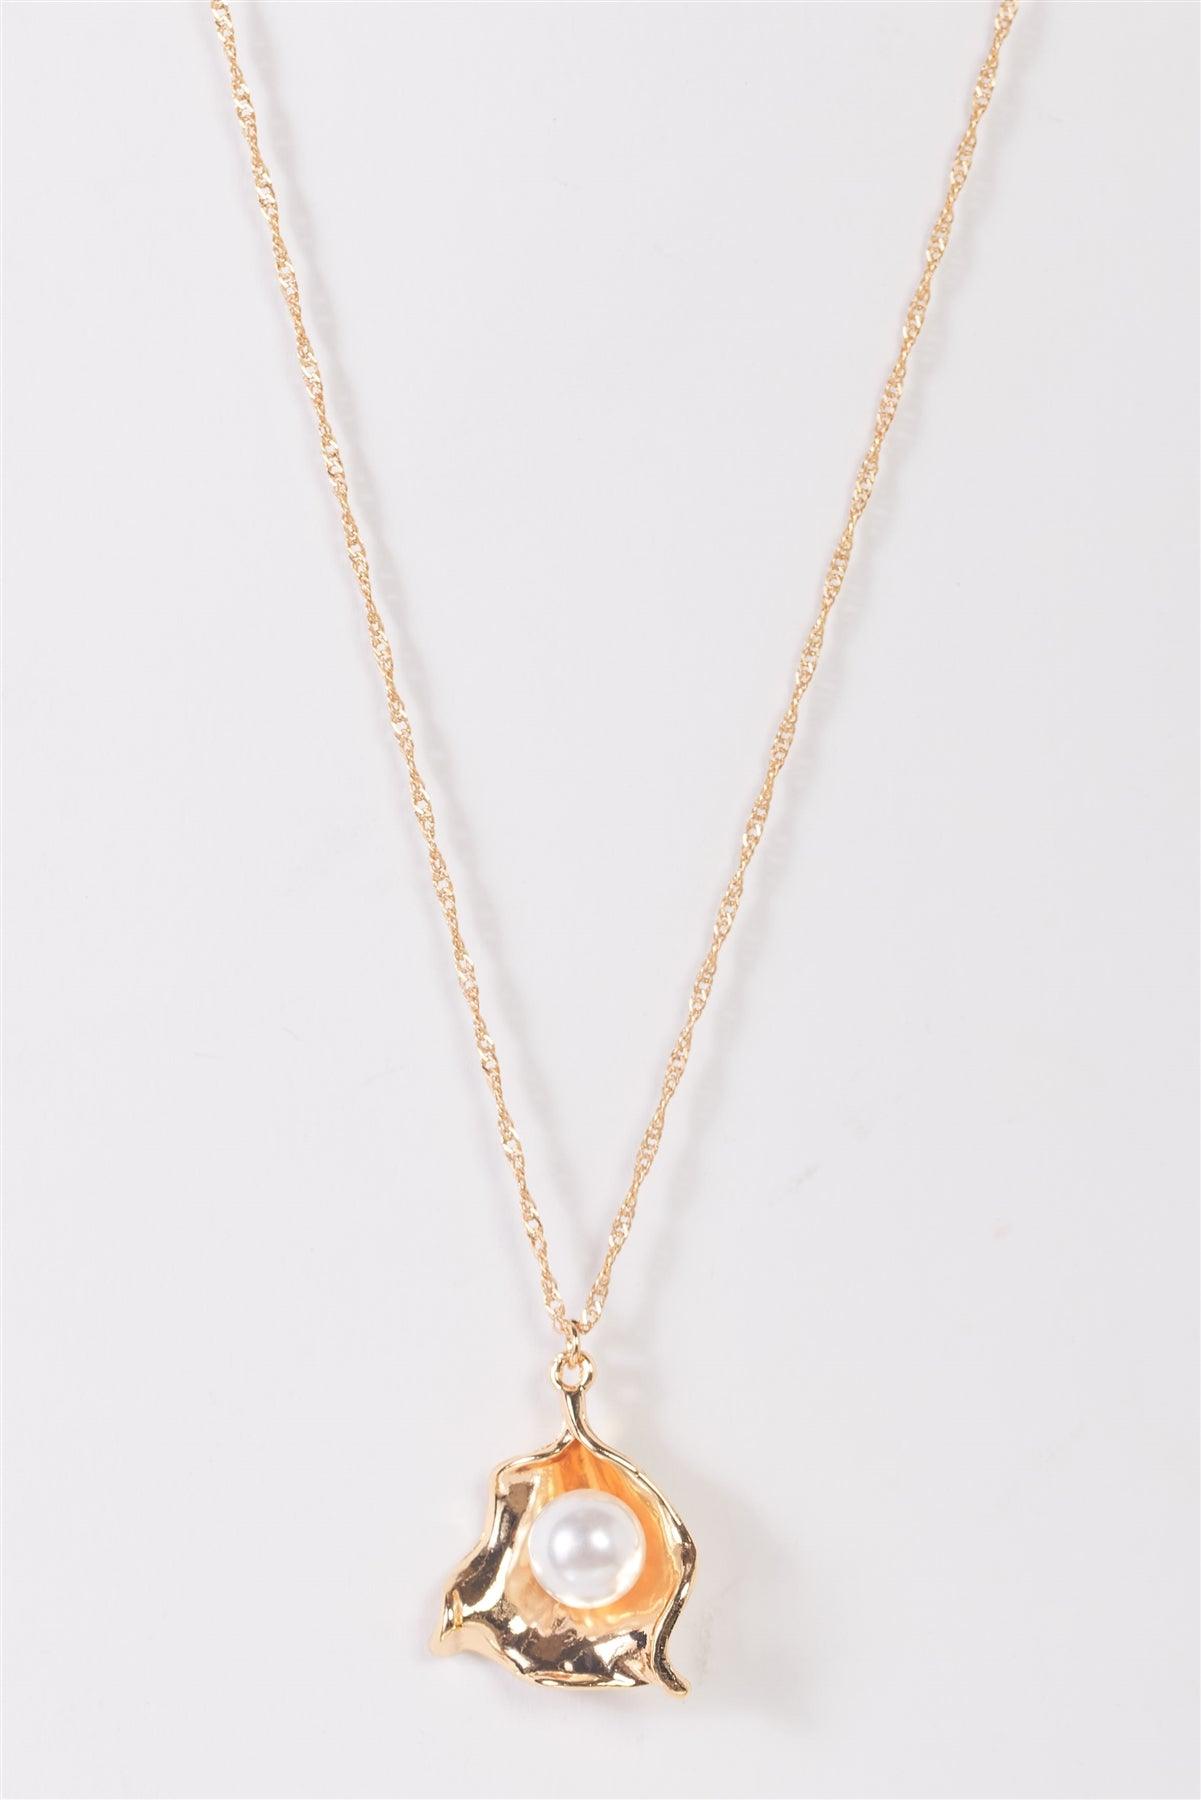 Gold Chain & Gold Shell Pendant With White Pearl Necklace/3 Pieces